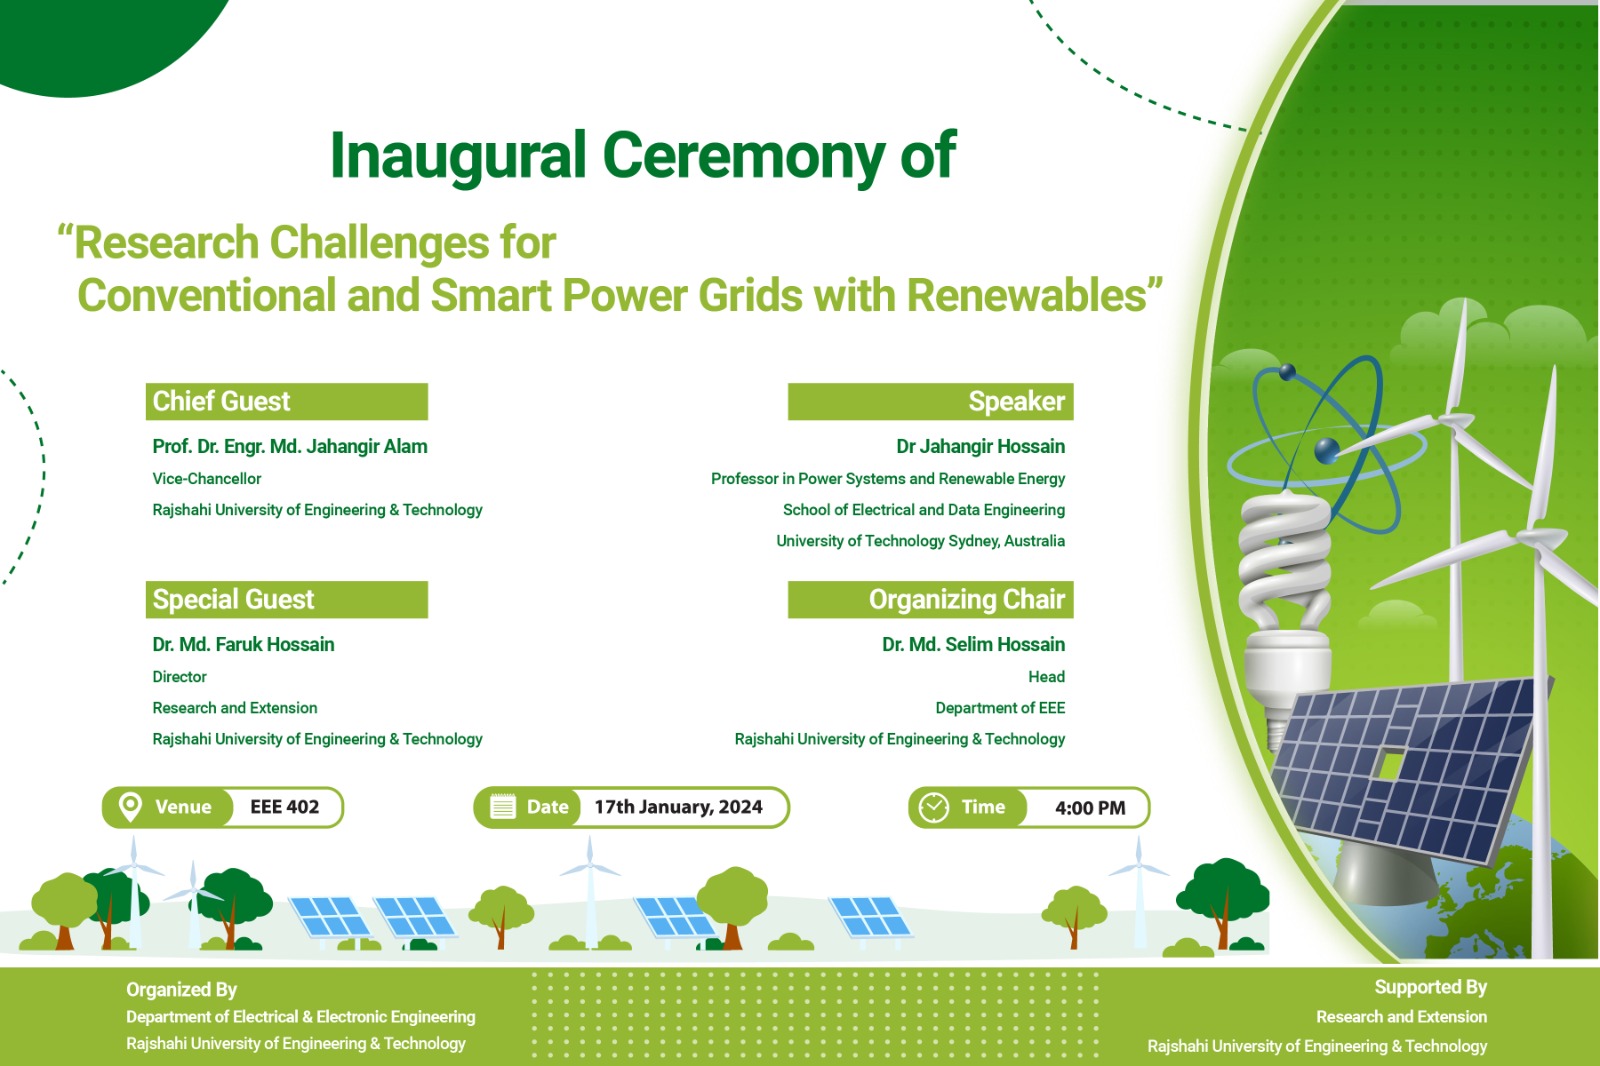 Seminar on Research Challenges for Conventional and Smart Power Grids with Renewable